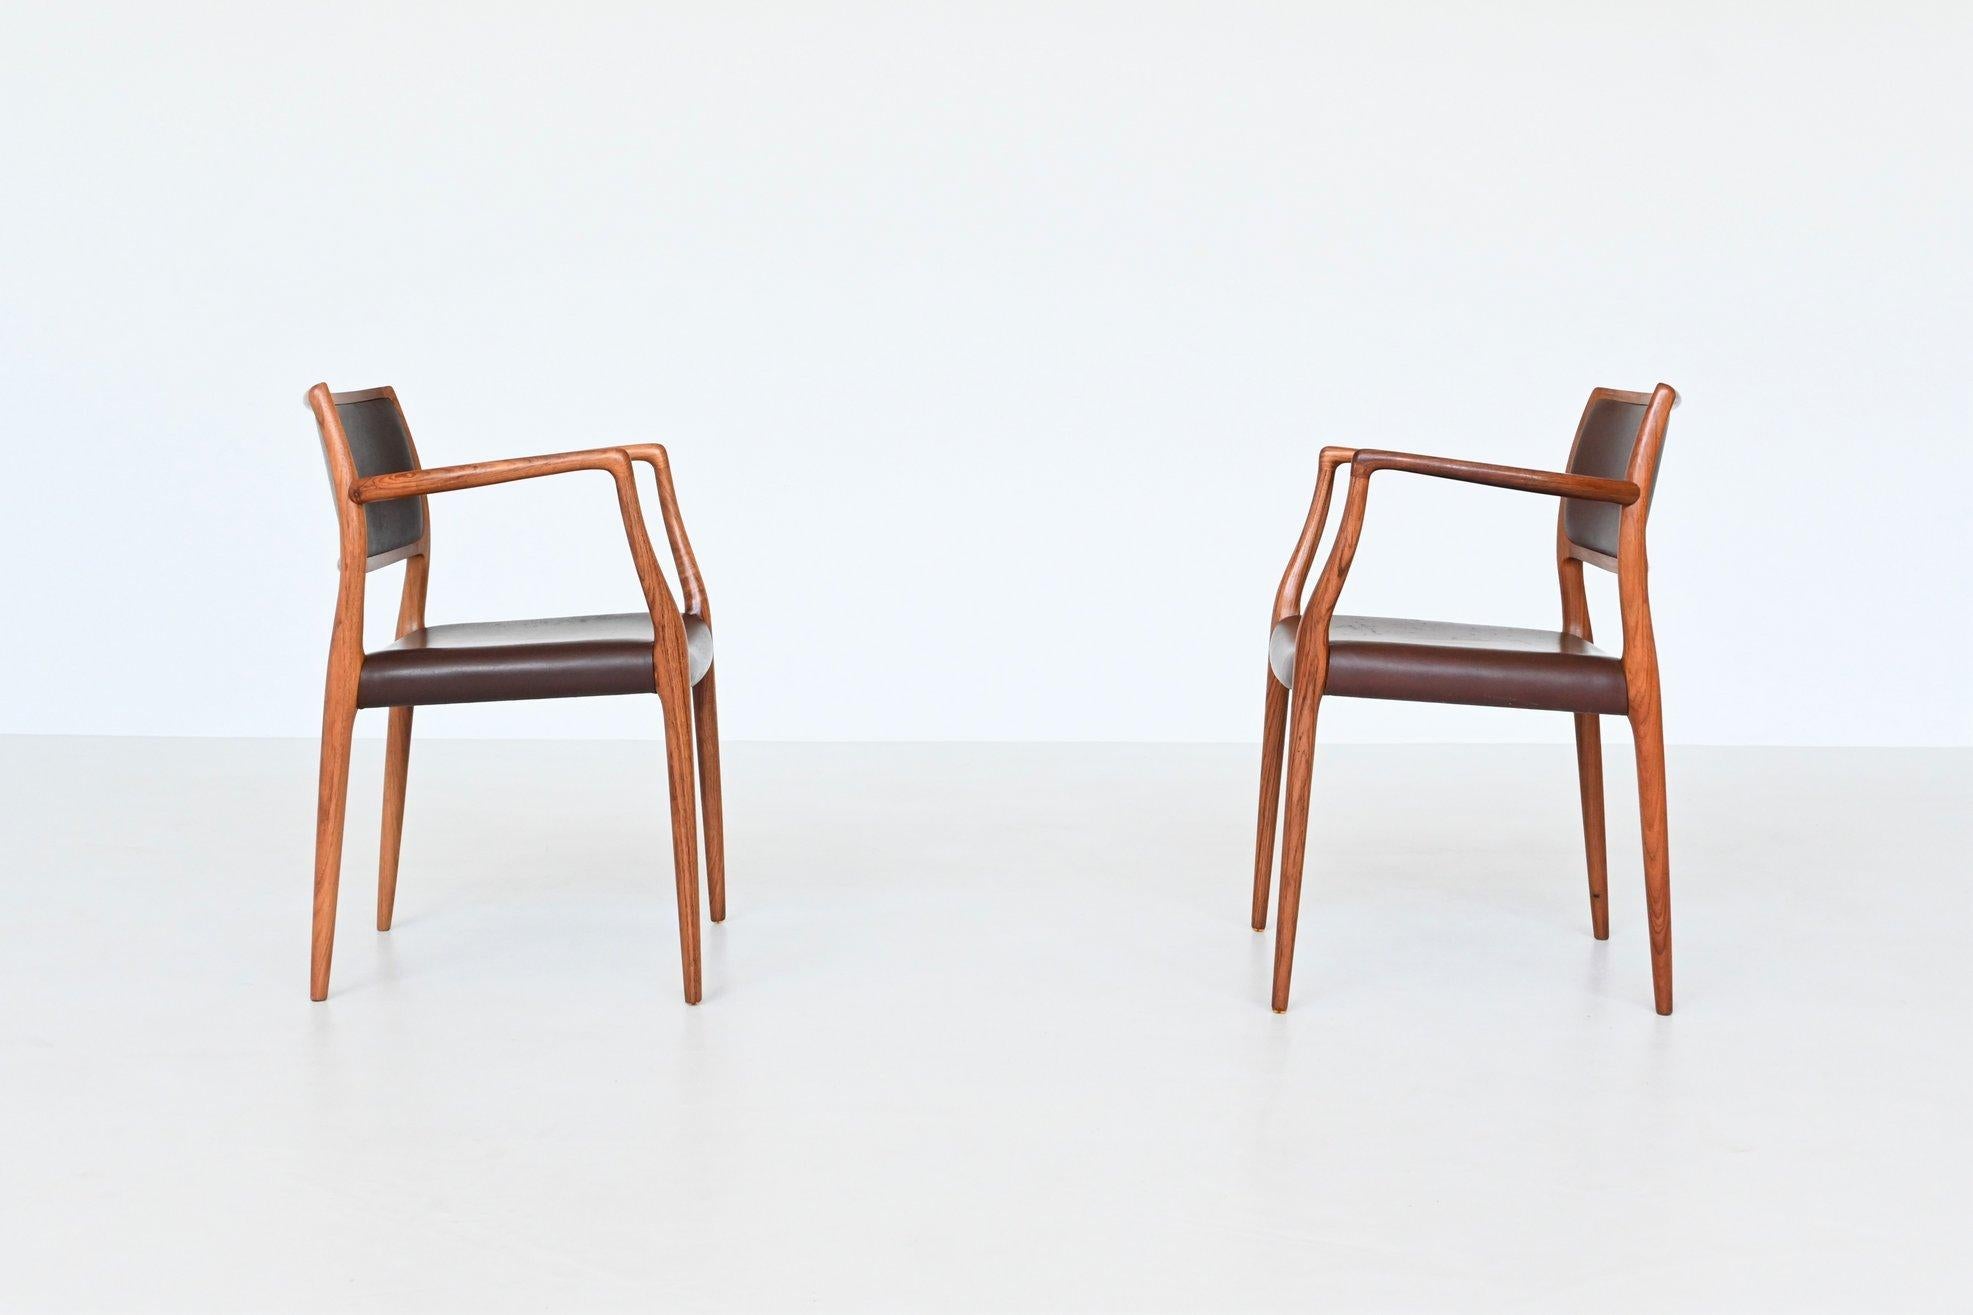 Beautiful shaped pair of armchairs model 65 designed by Niels Otto Møller and manufactured by J.L. Møller Mobelfabrik, Denmark 1968. These sculptural and elegant dining chairs are made of solid amazingly grained rosewood. The seats are upholstered